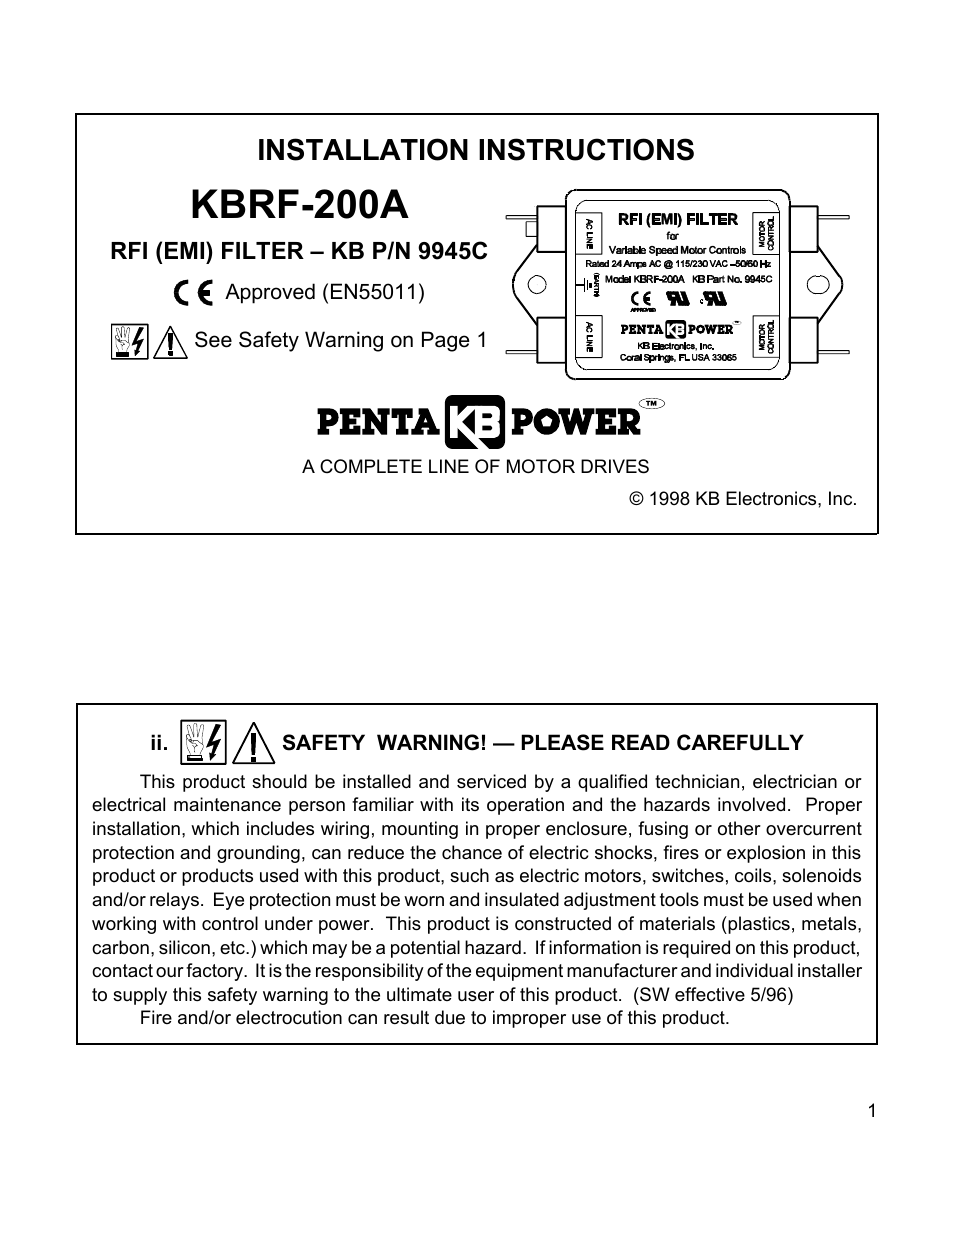 KBRF-200A CE Approved AC Line Filter for SCR Controls (Class A)